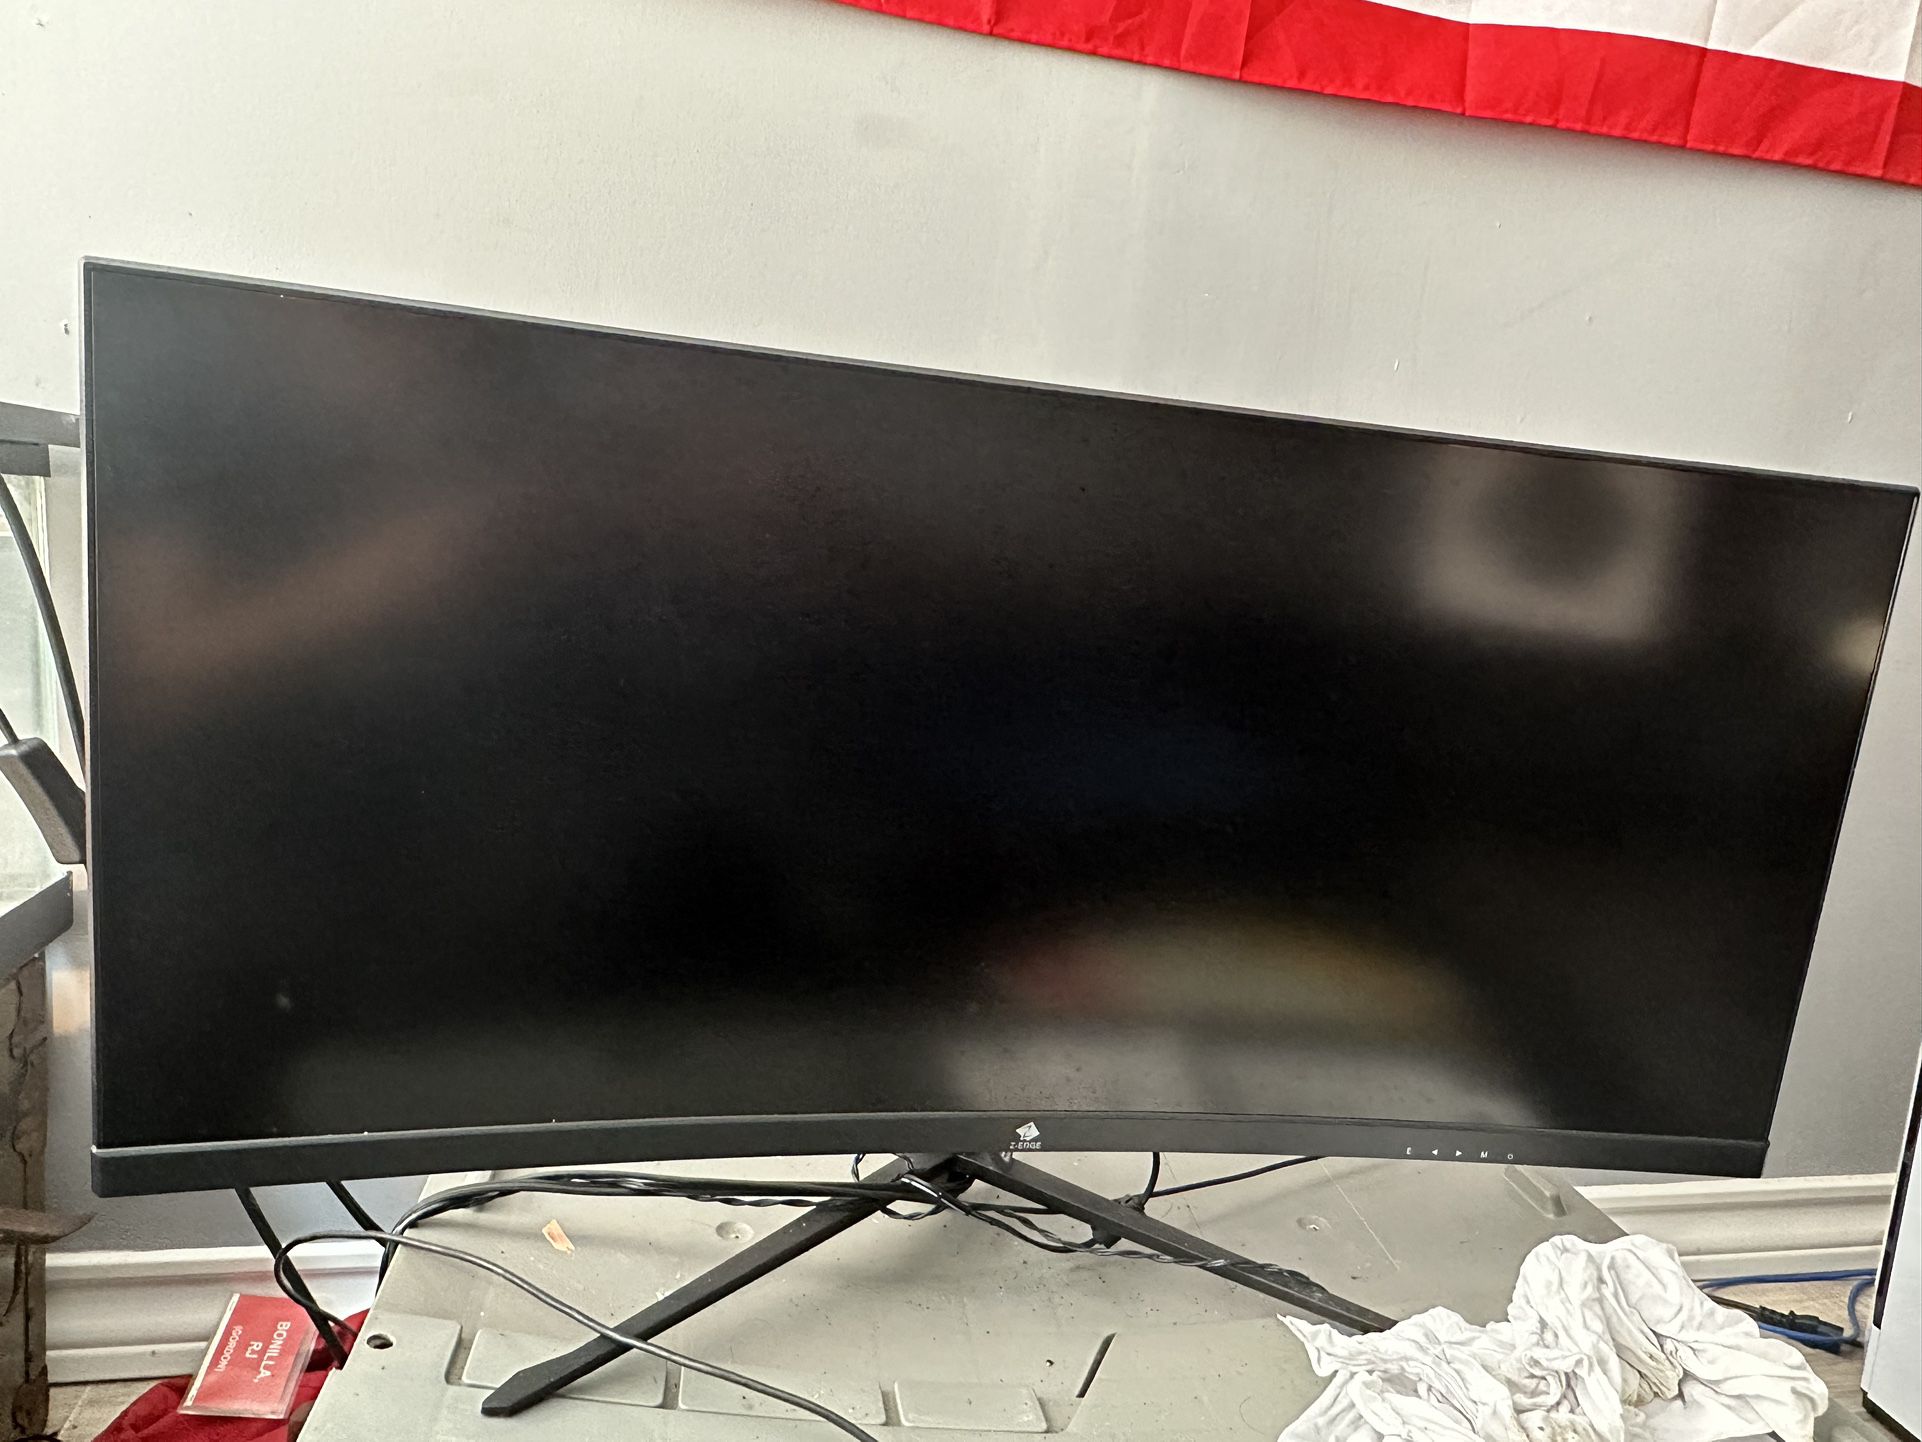 Z-Edge 30” Curved Gaming Monitor